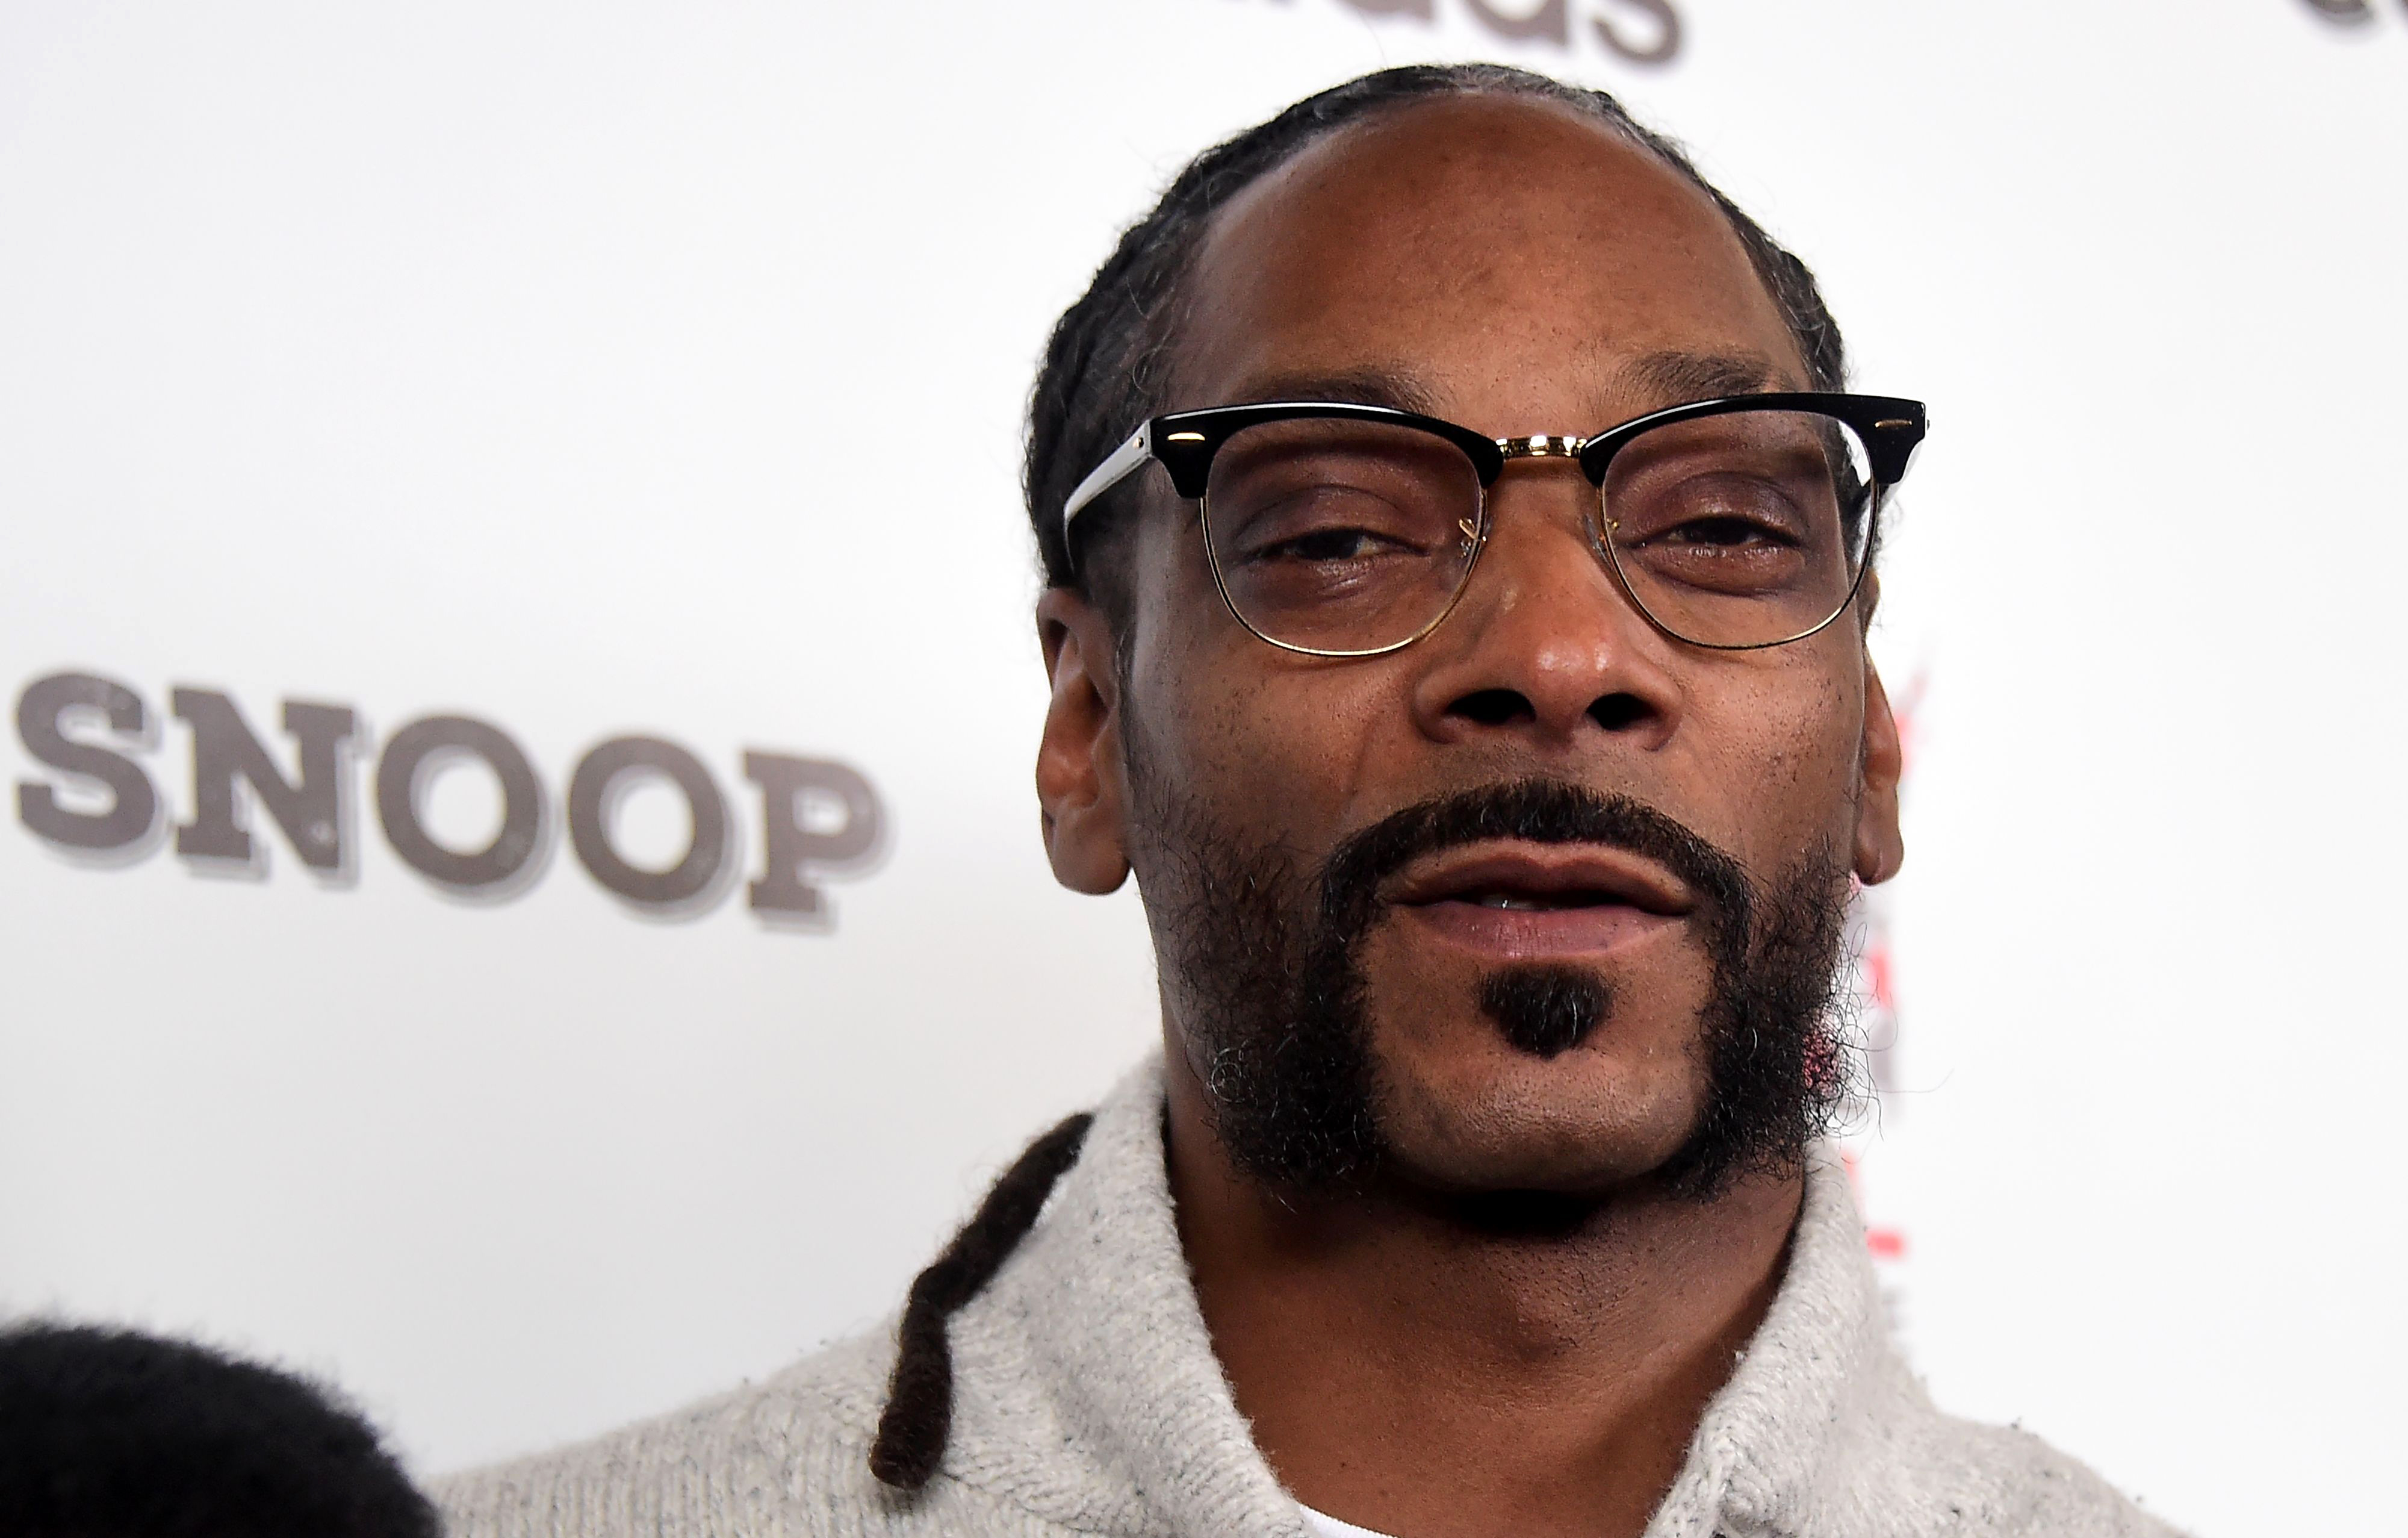 Snoop Dogg to induct Tupac Shakur into the Rock and Roll Hall of Fame - CBS News4000 x 2554